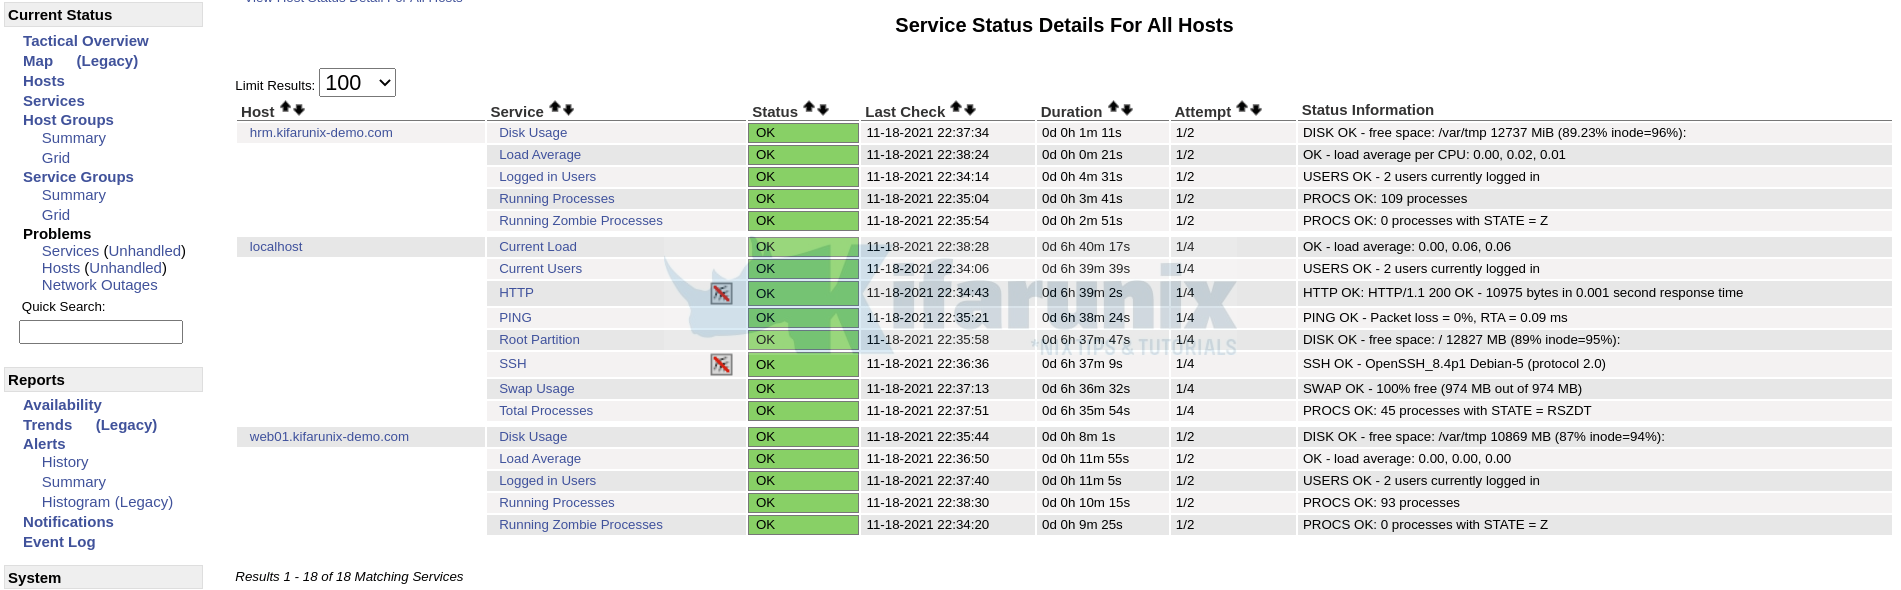 Add Hosts to Nagios Server For Monitoring